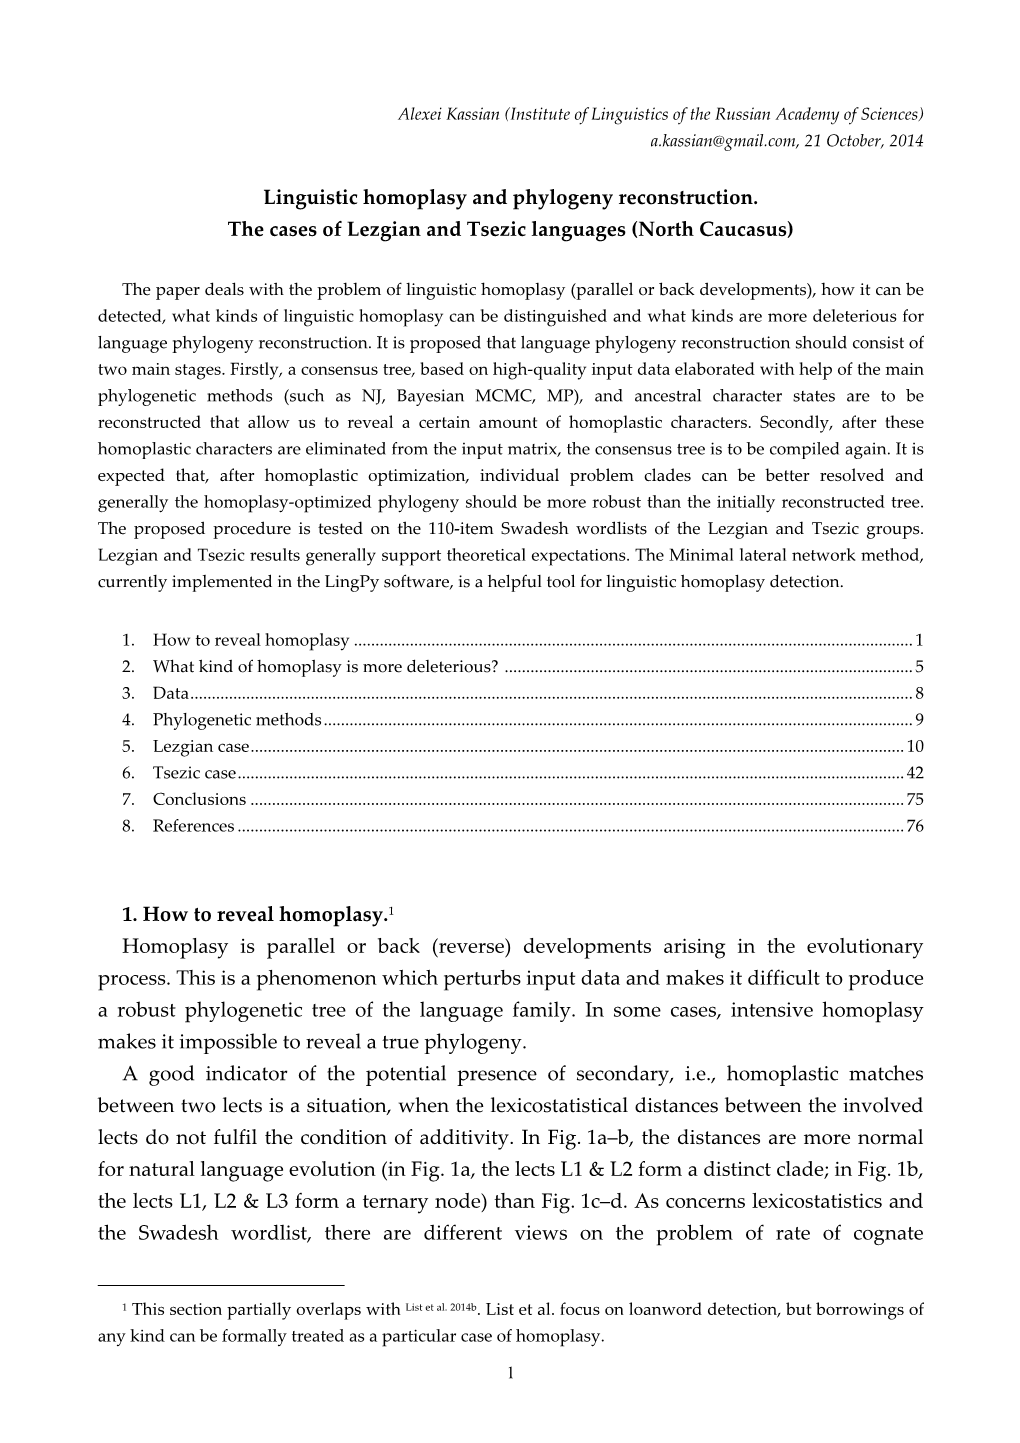 Linguistic Homoplasy and Phylogeny Reconstruction. the Cases of Lezgian and Tsezic Languages (North Caucasus)